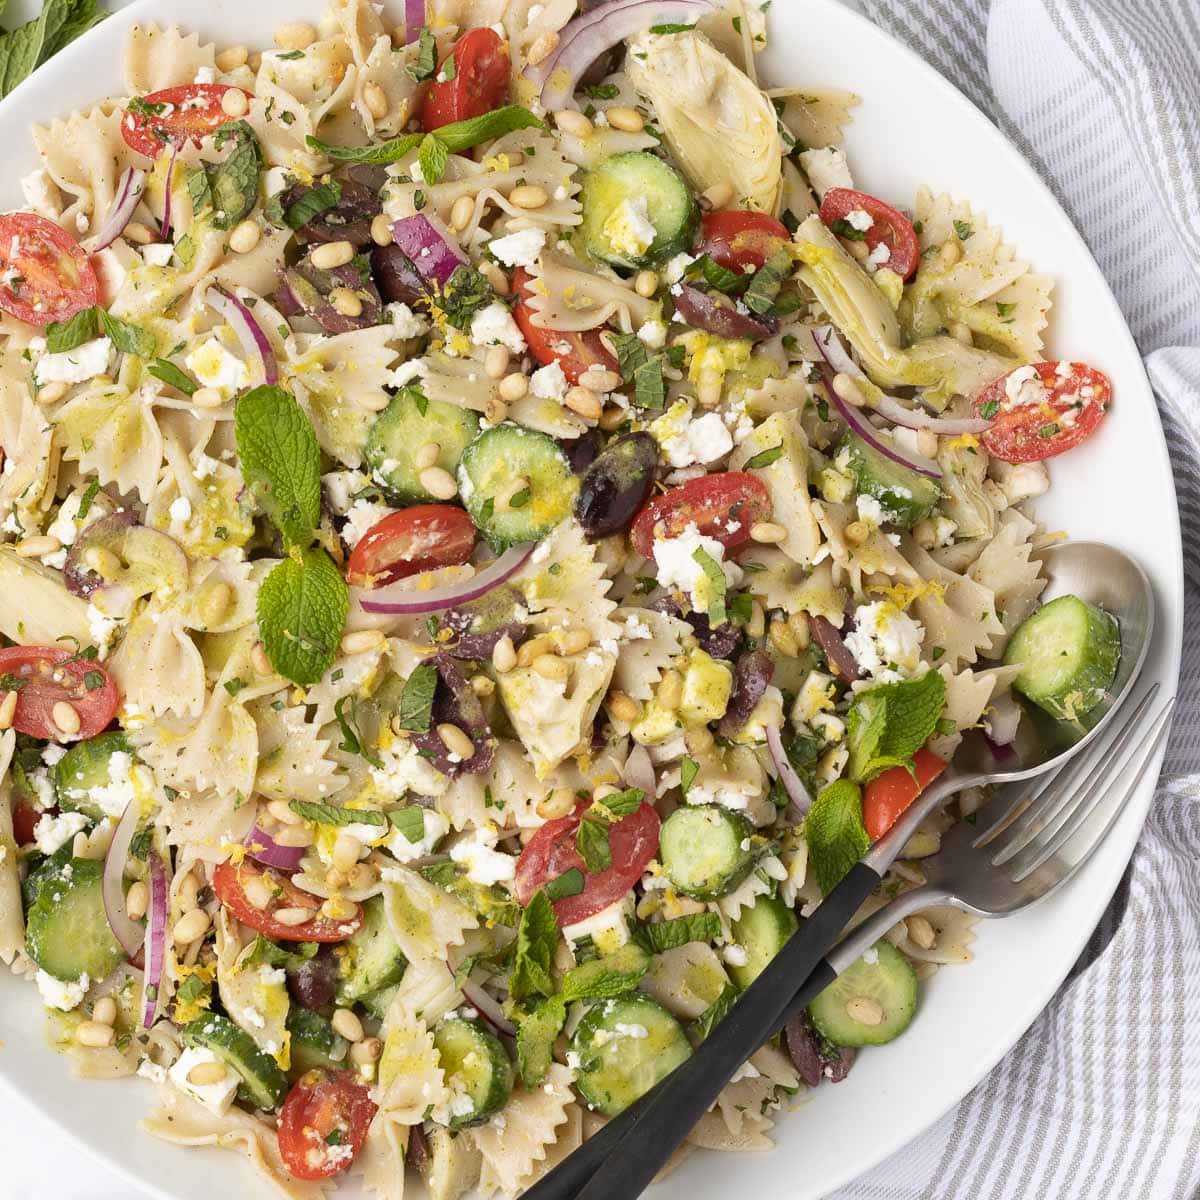 White bowl of colorful farfalle pasta salad with serving utensils.